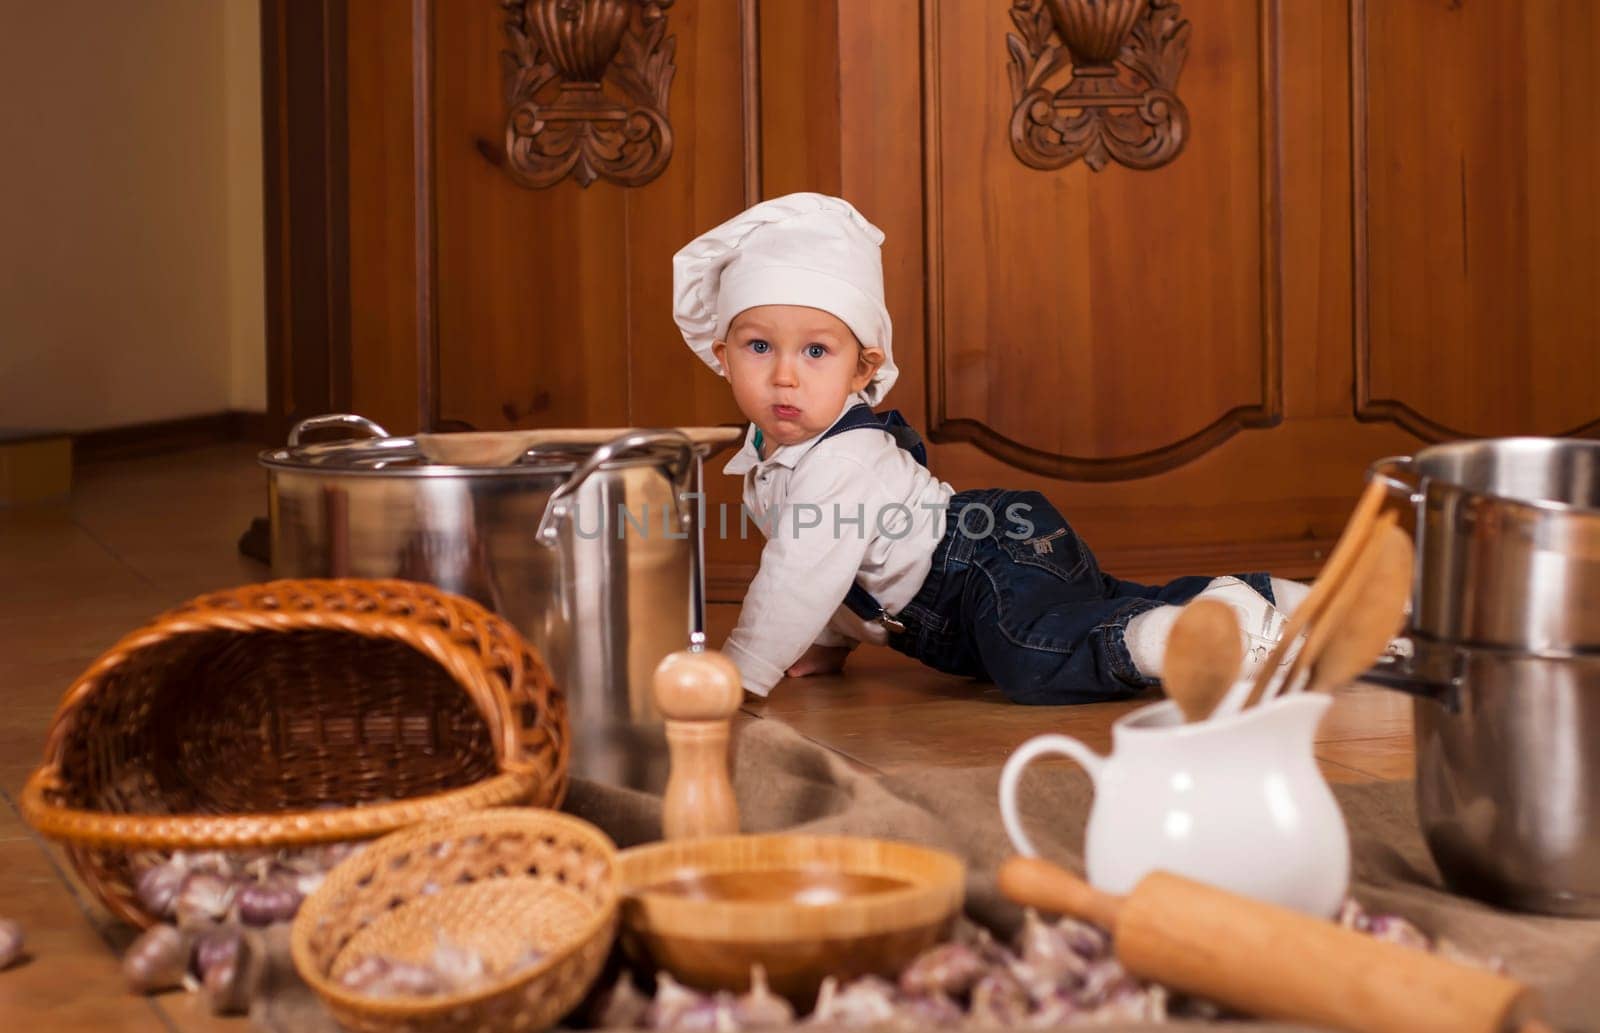 Little boy in chef's hat with ladle, pan and vegetables